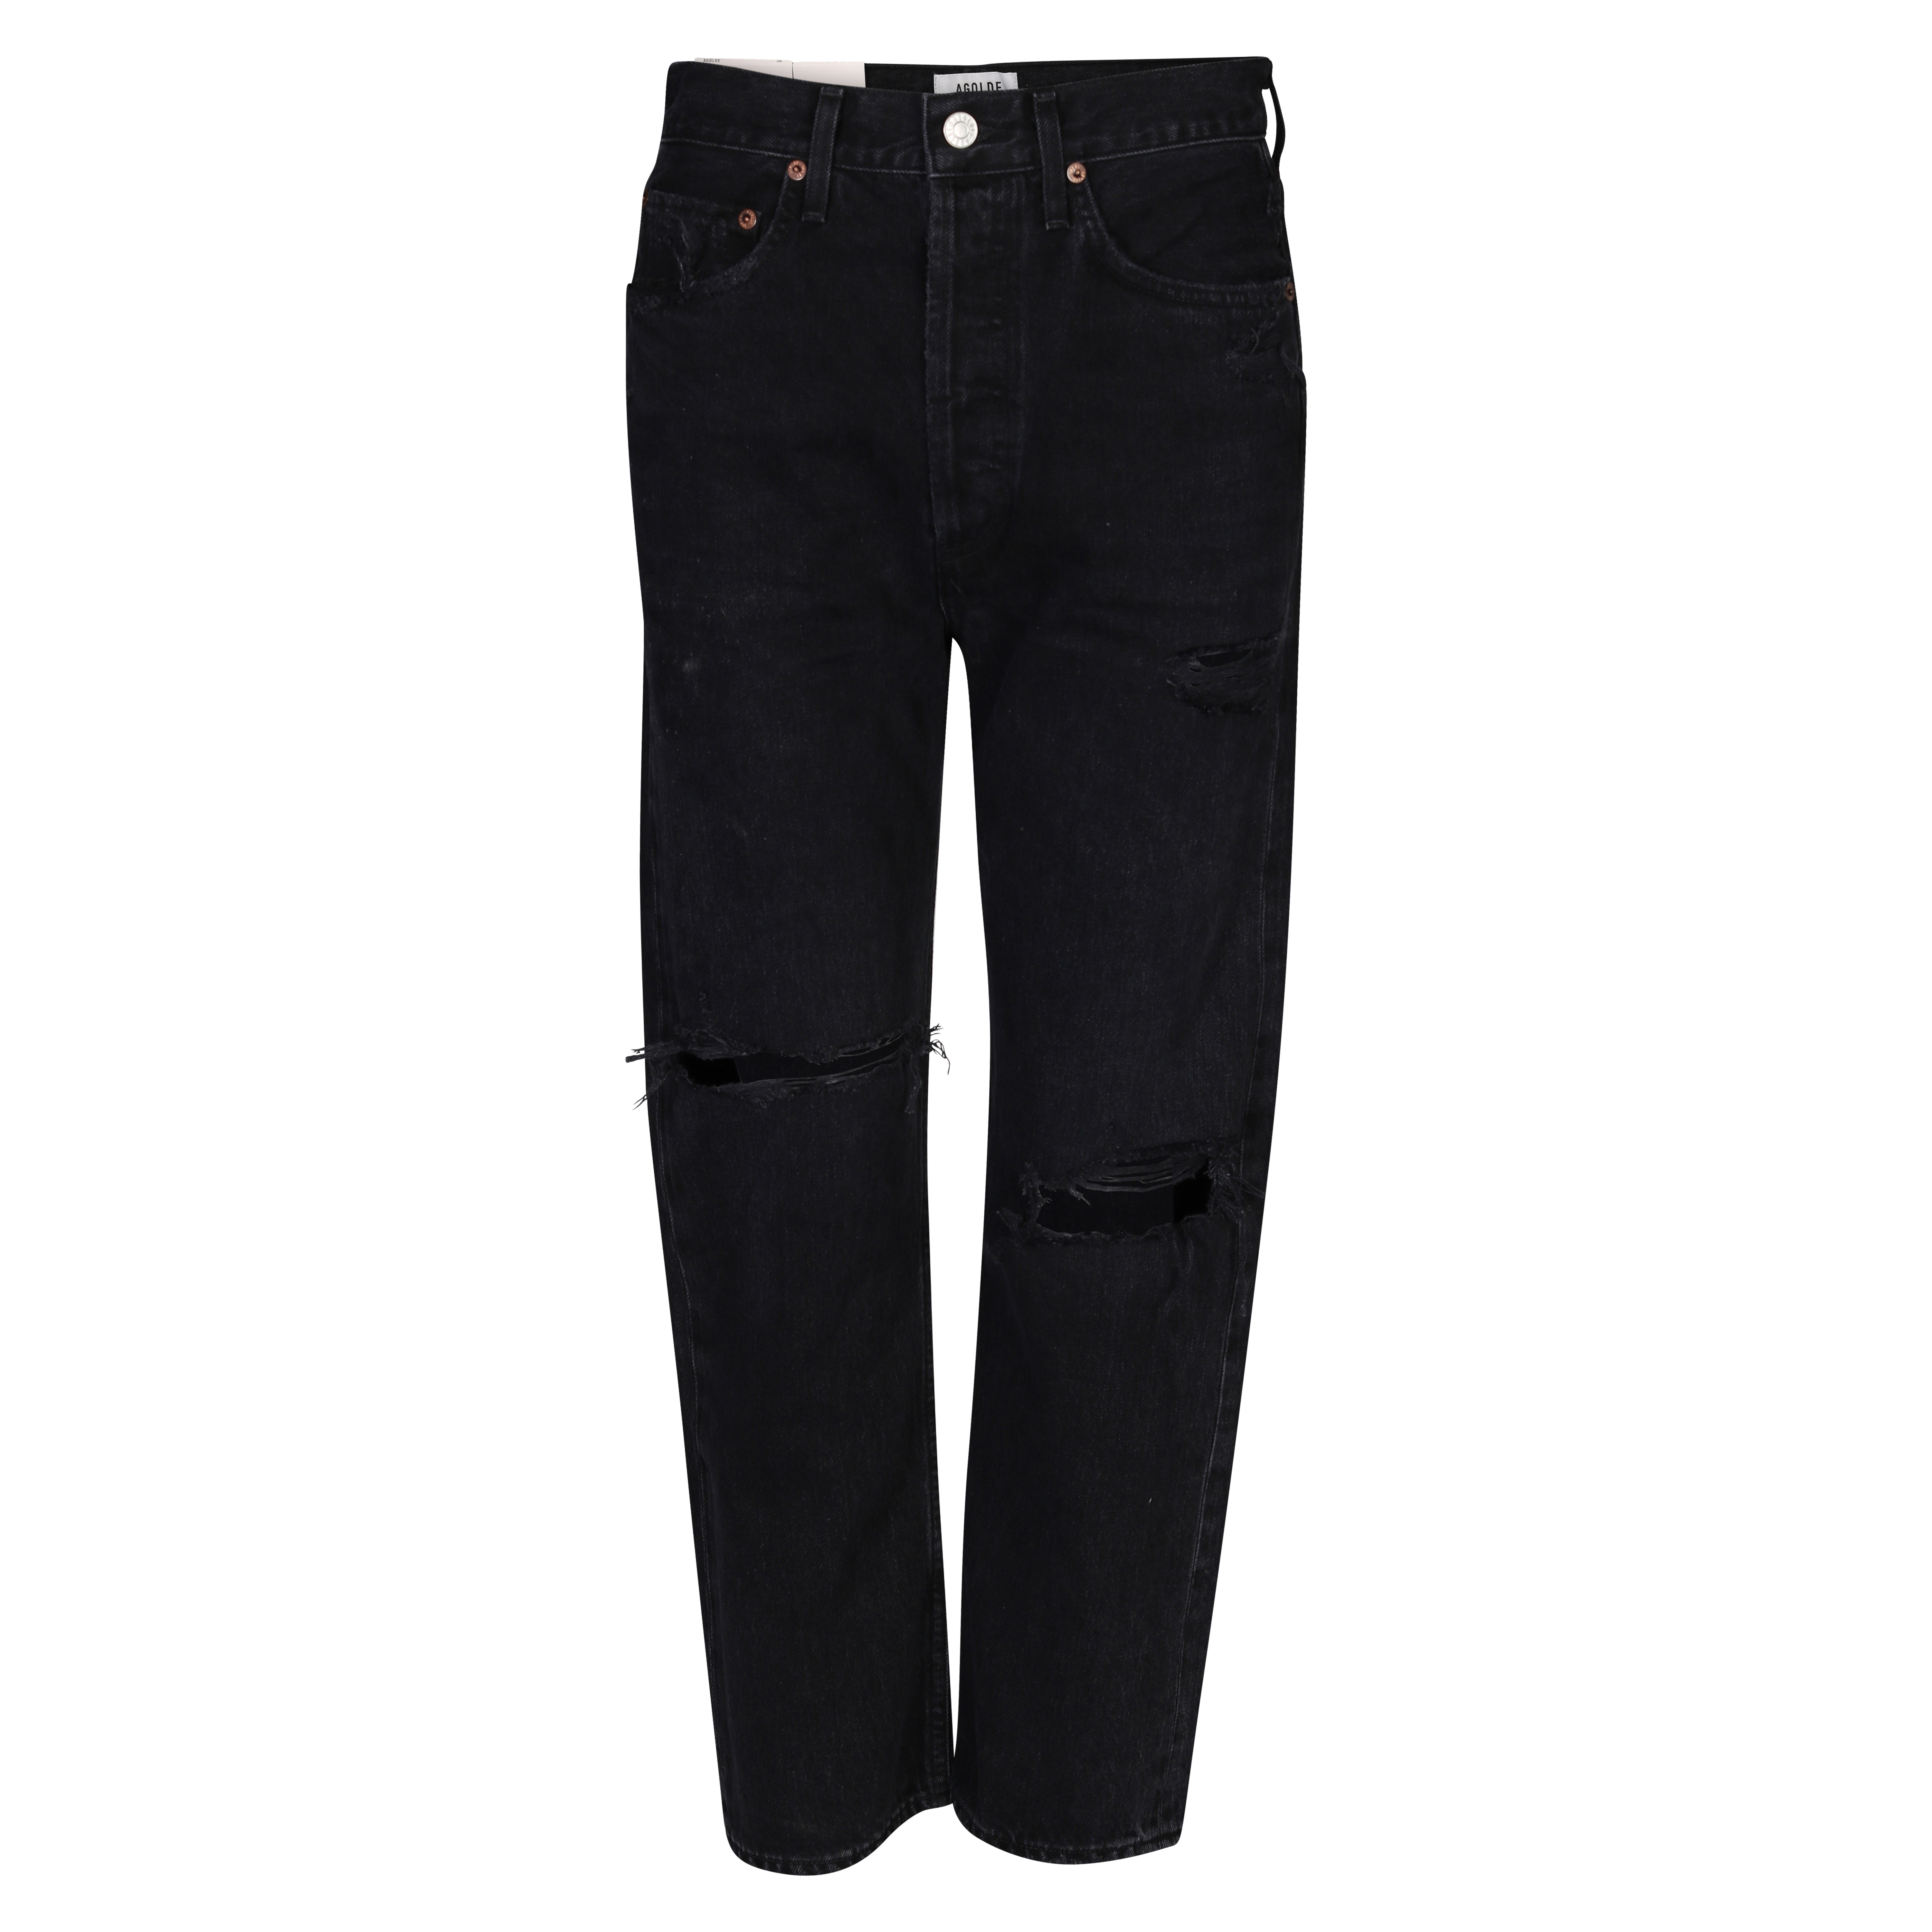 Agolde Jeans 90s Cropped in Black/Bauhaus Washed